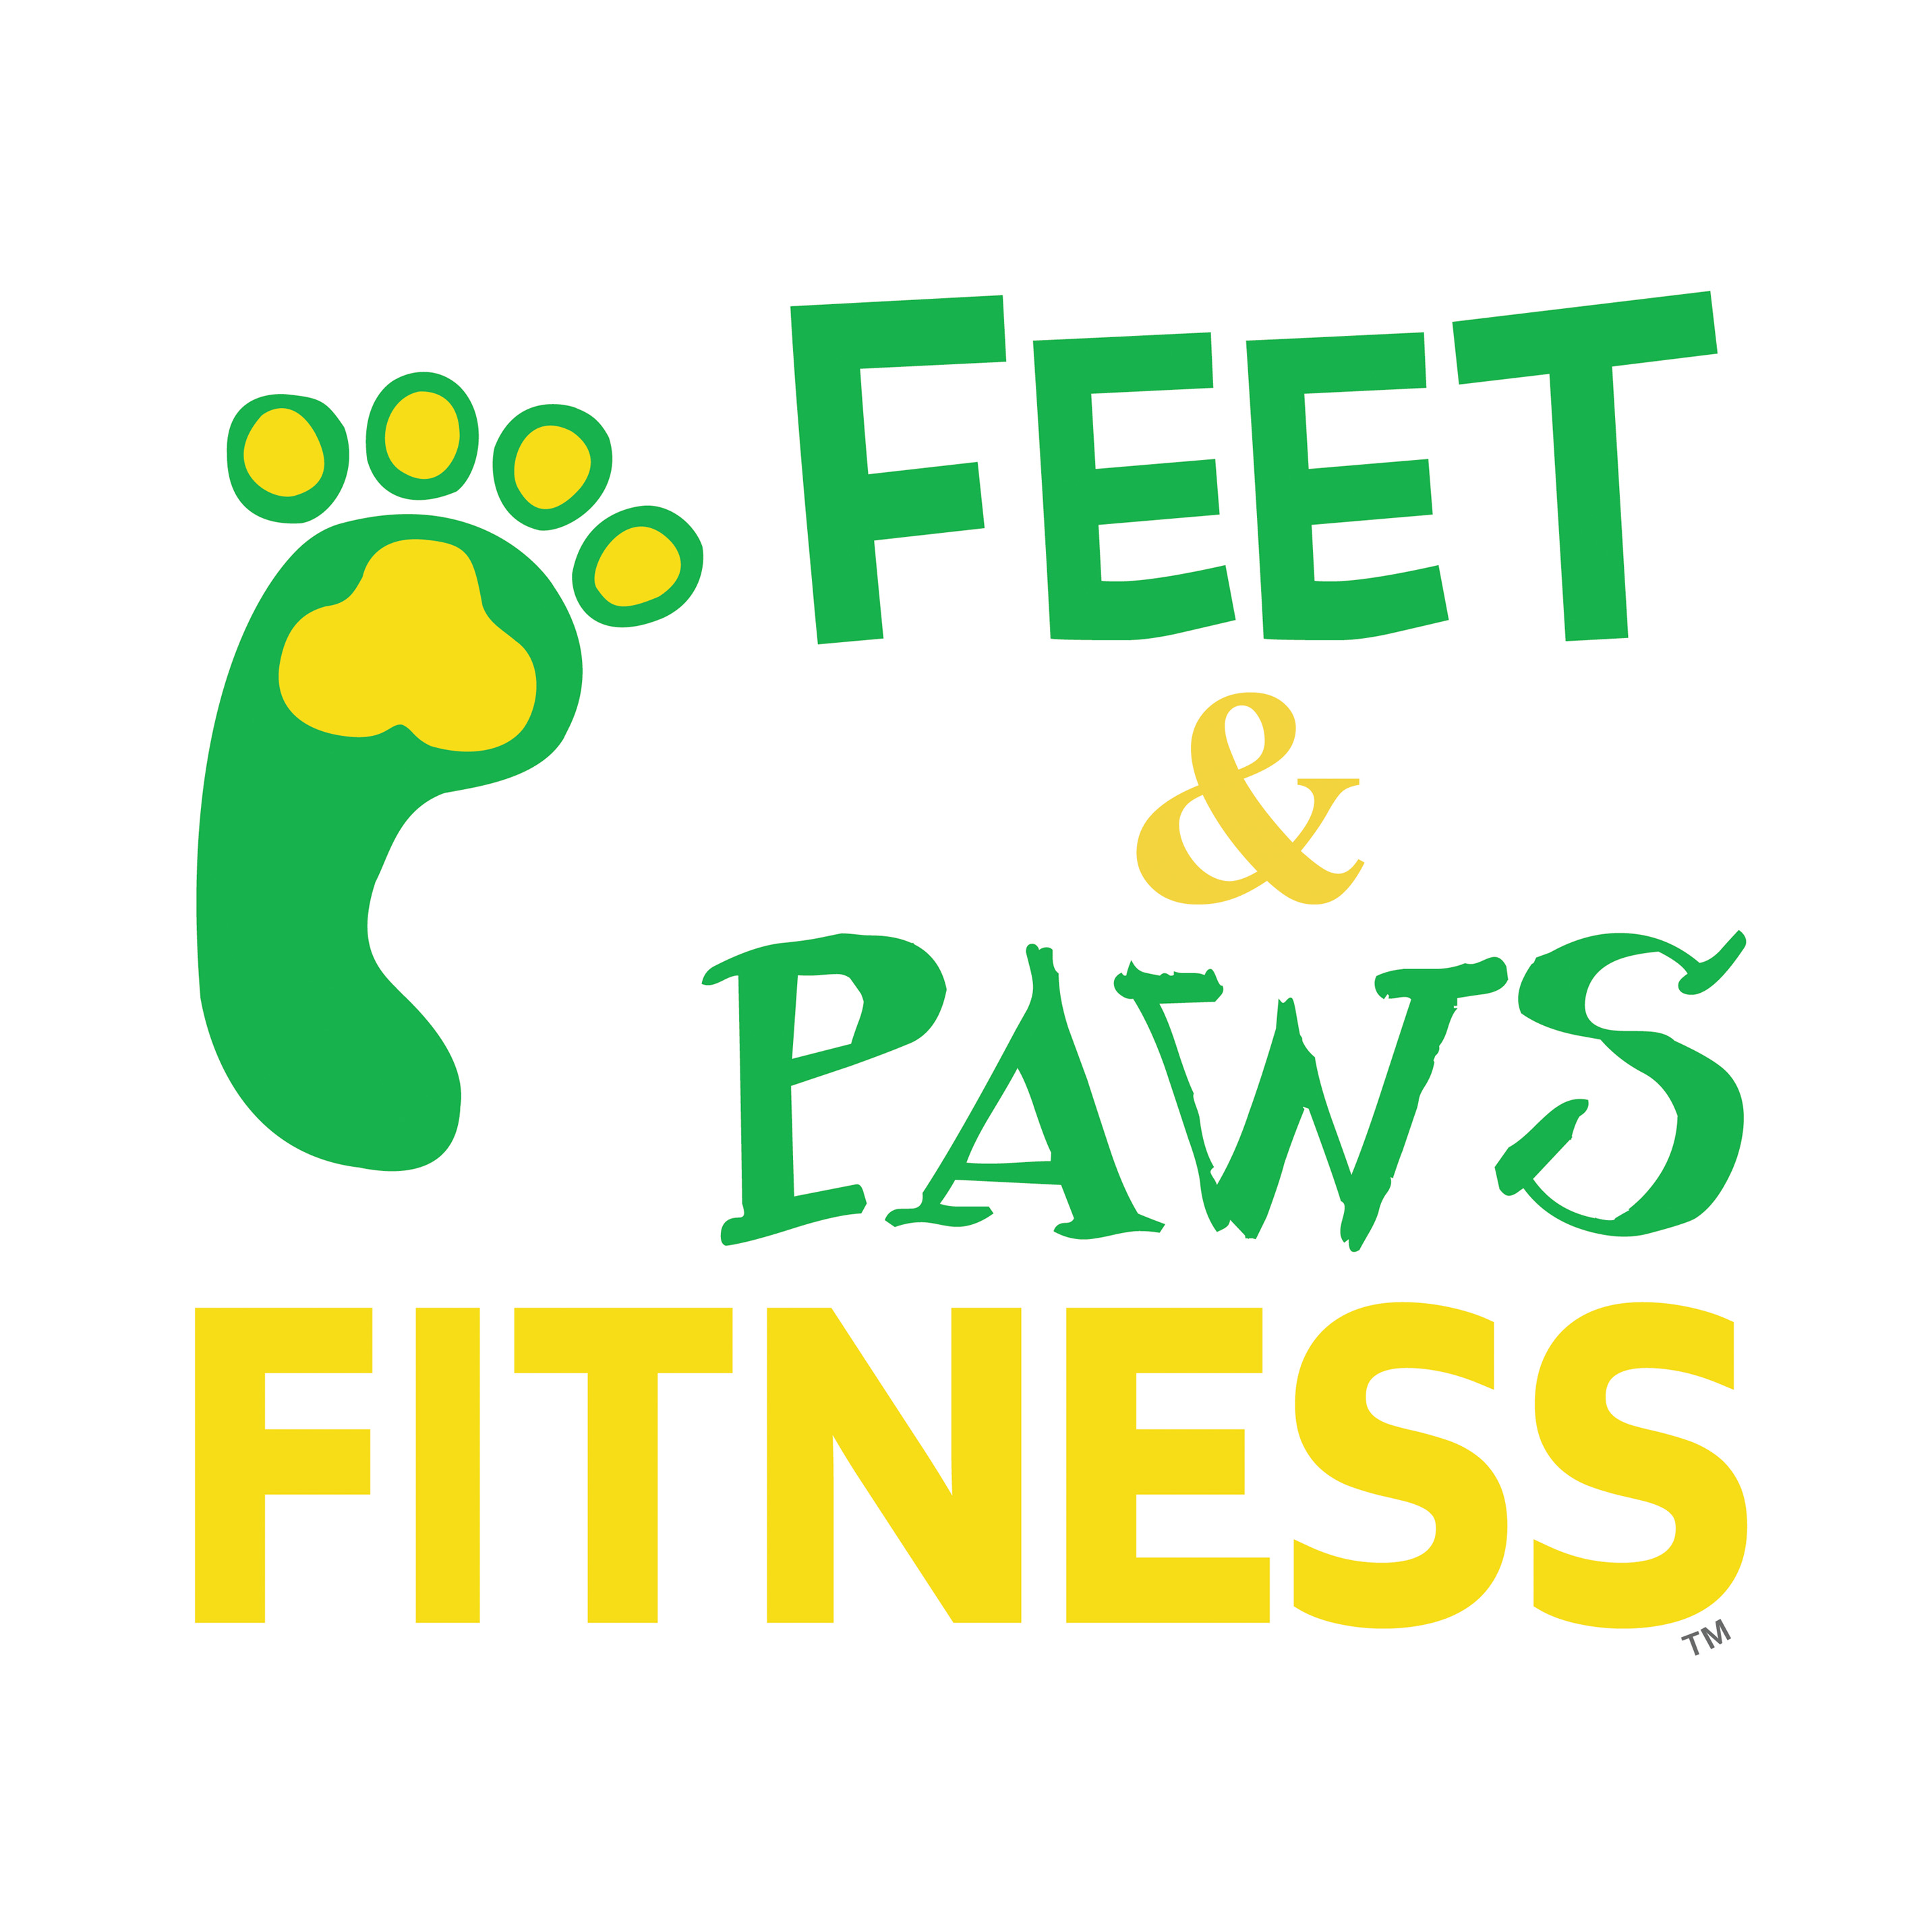 Feet & Paws Fitness